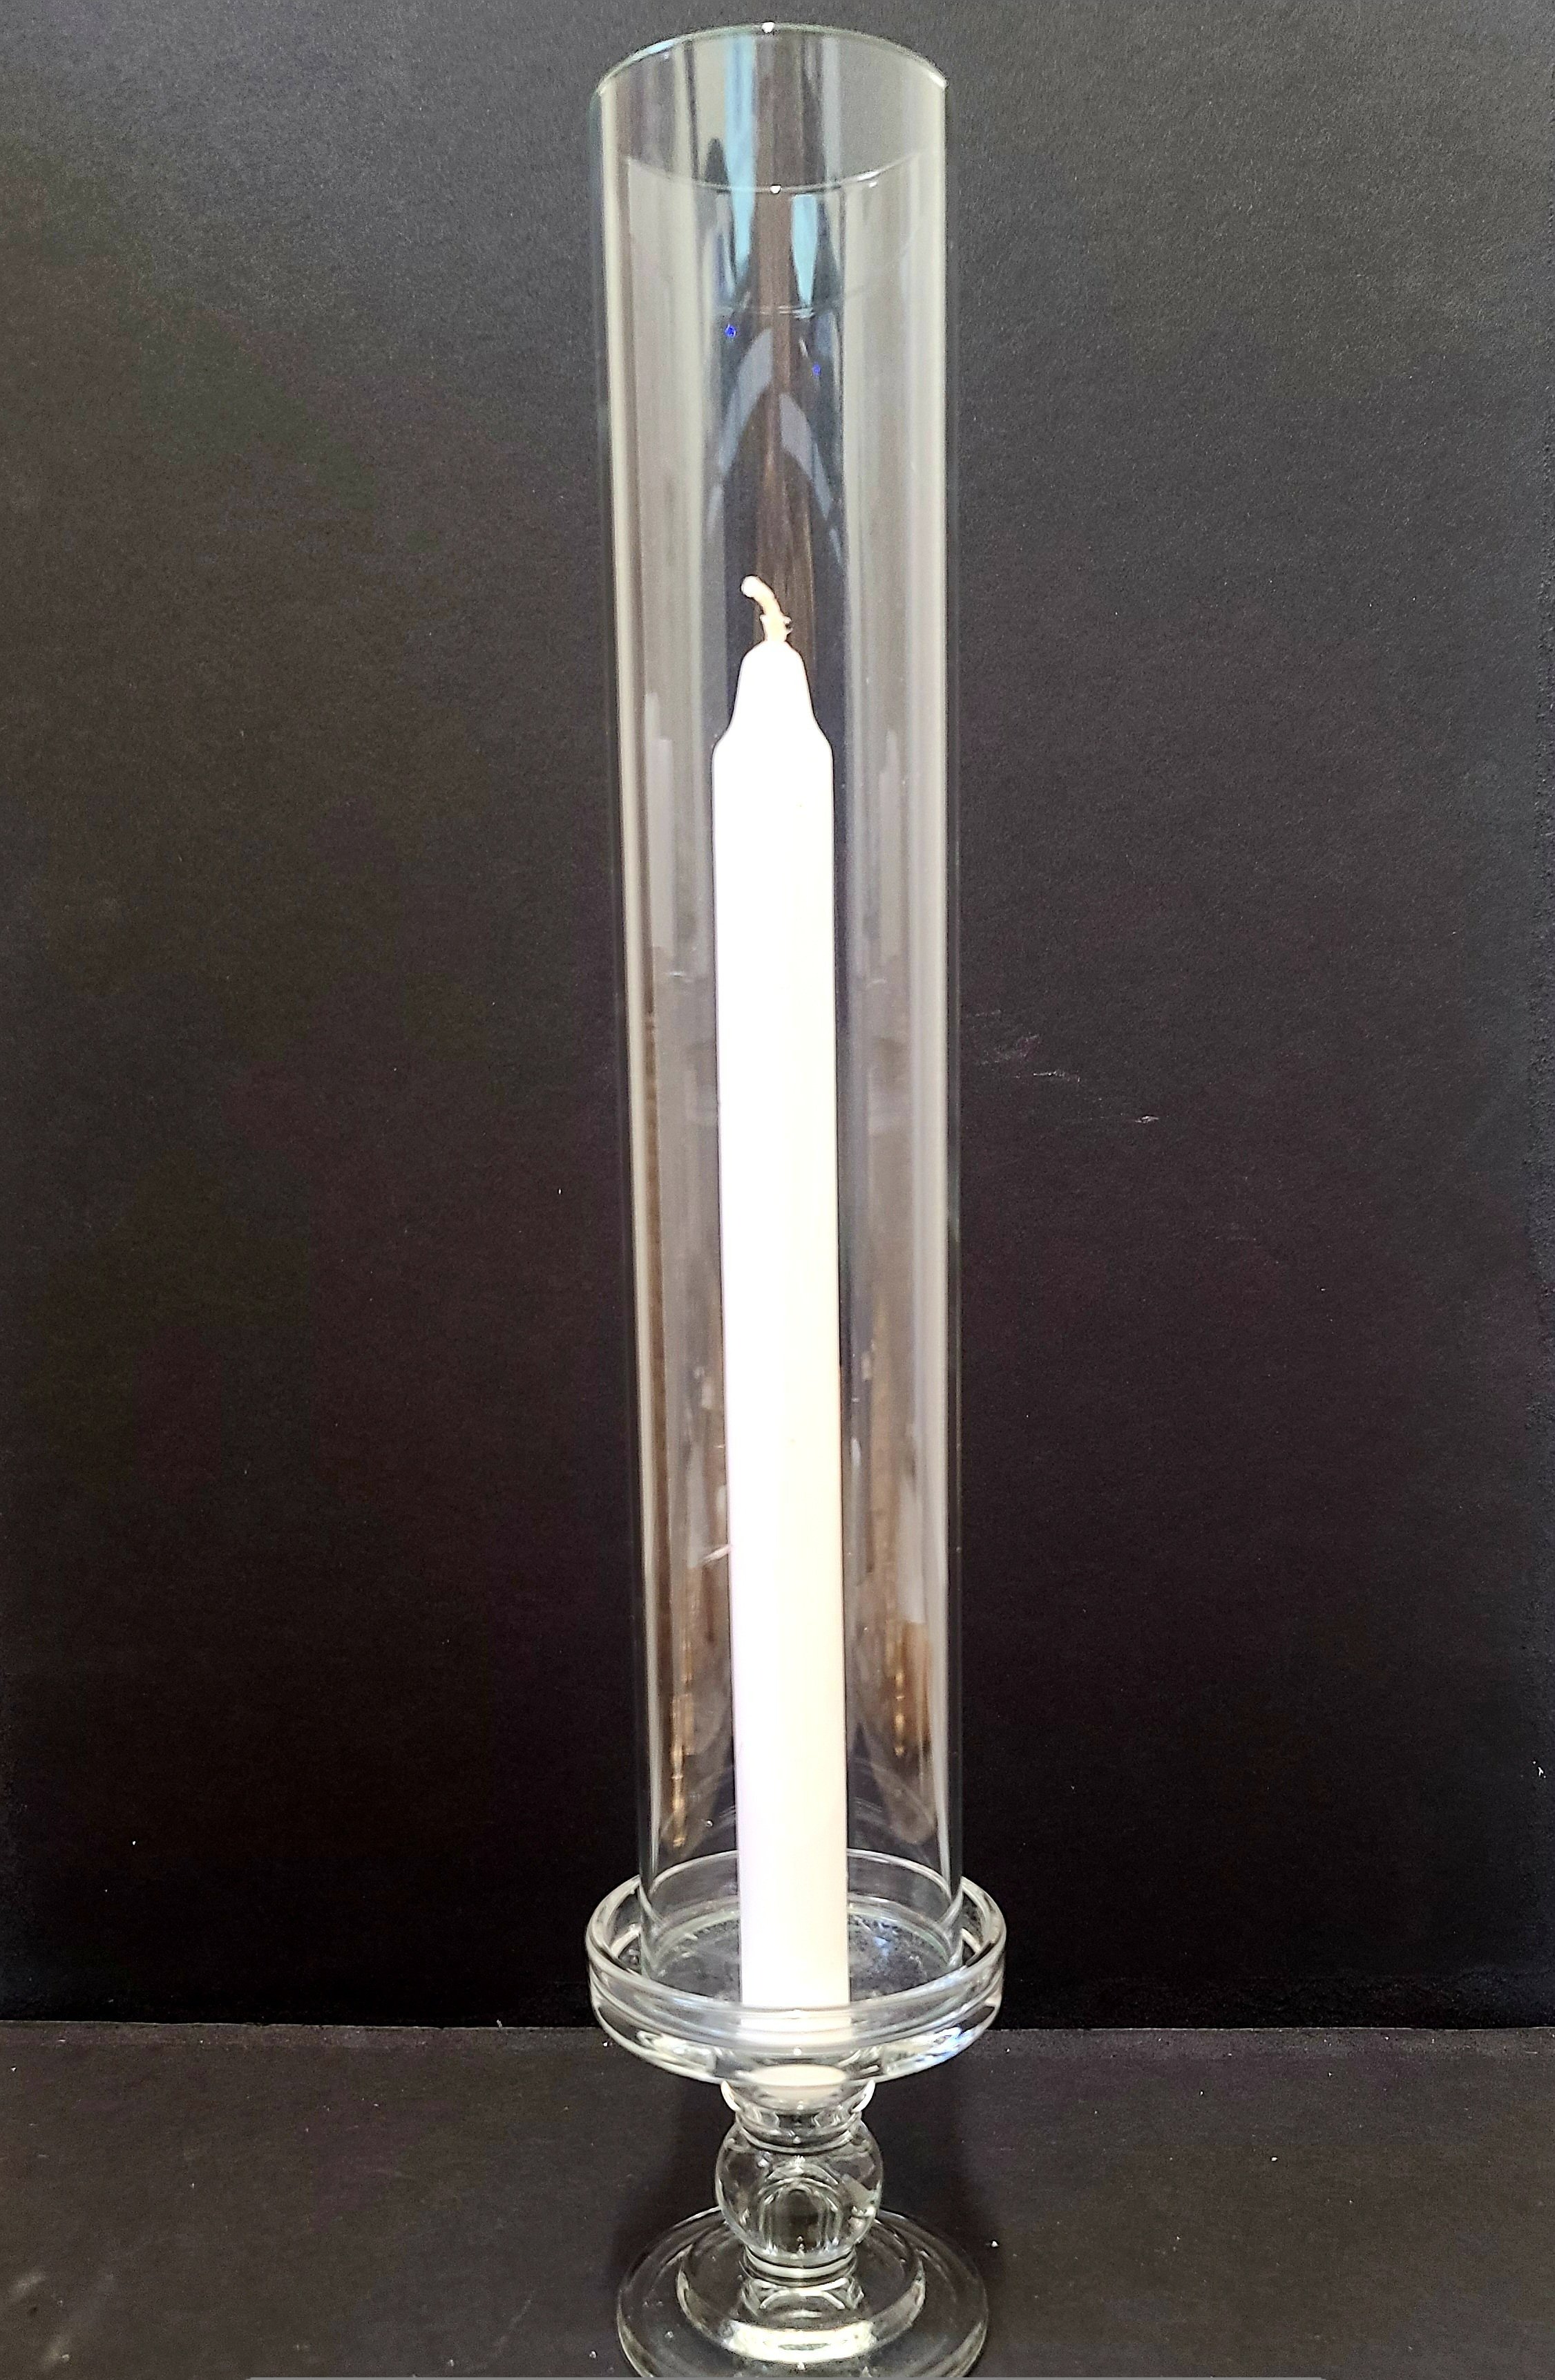 Taper with glass chimney (36) - $8 (or  $10 with candle )